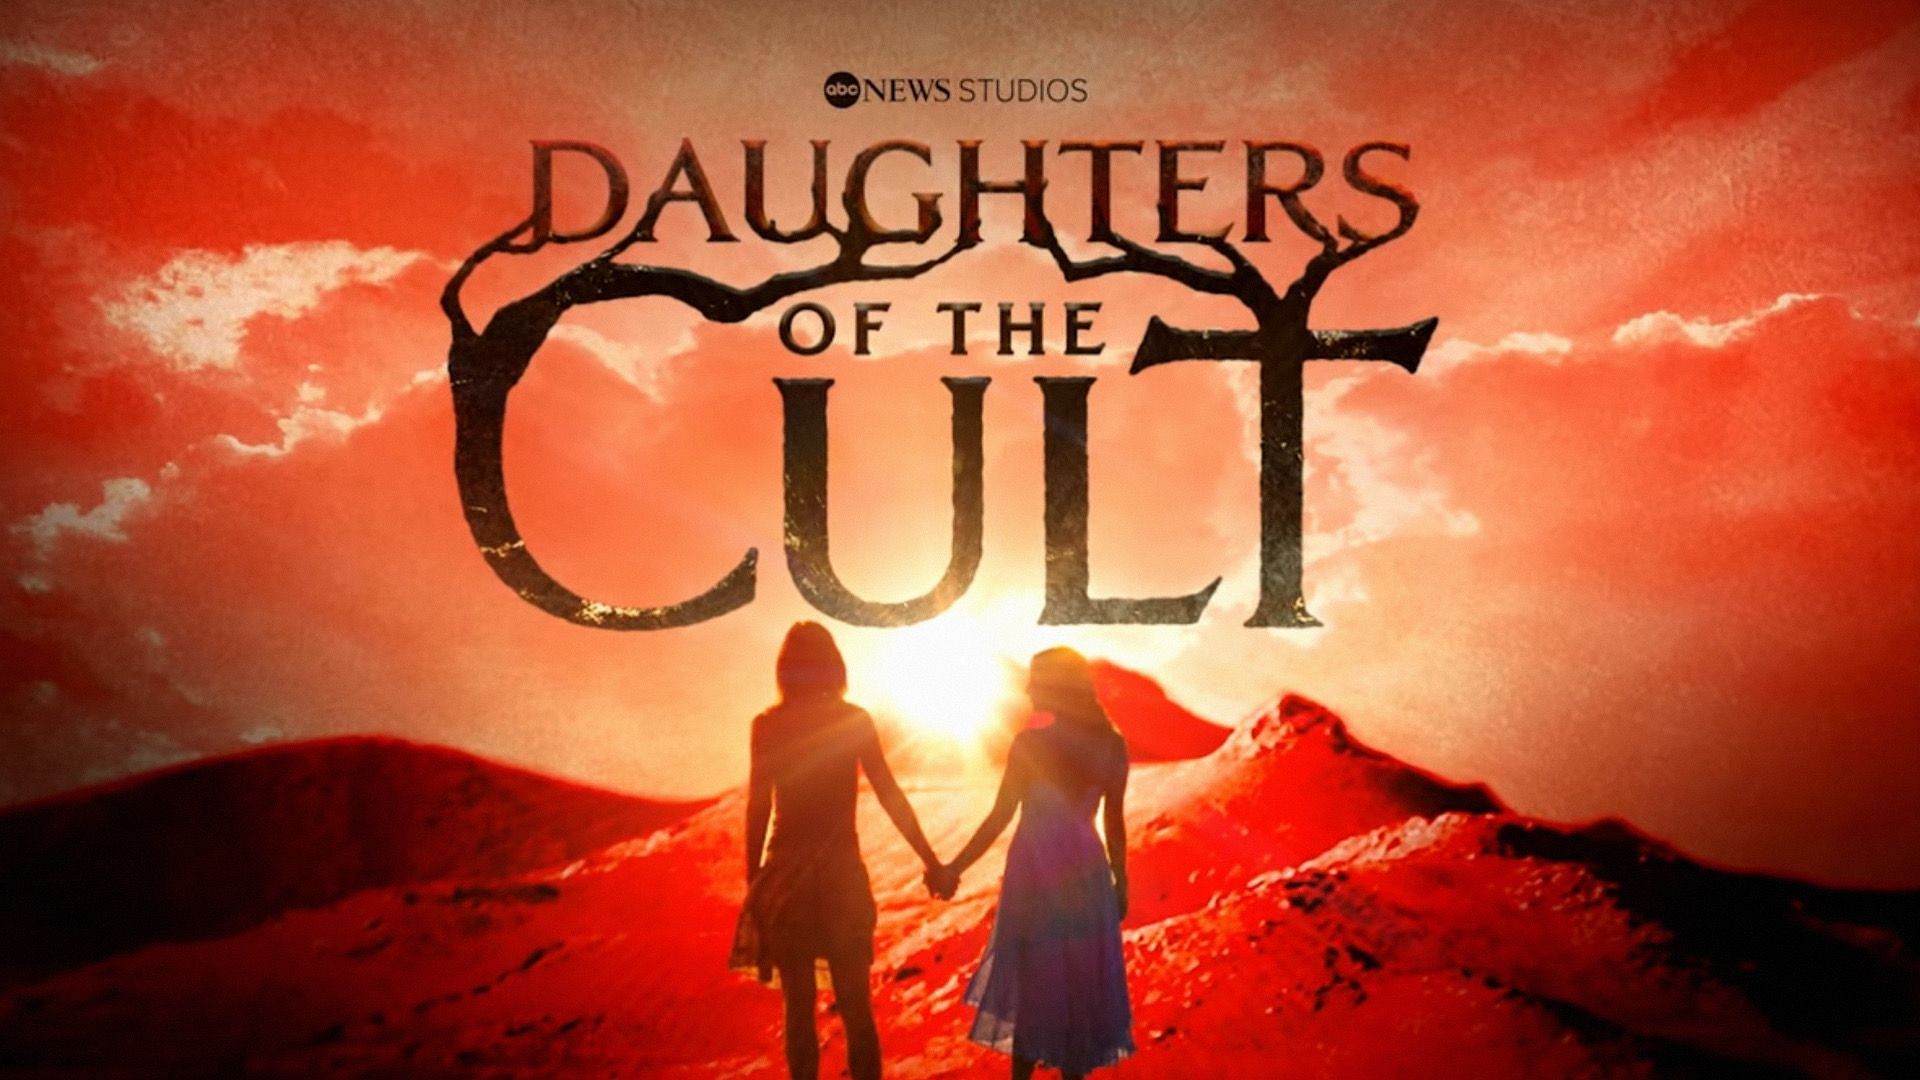 Daughters of the Cult 